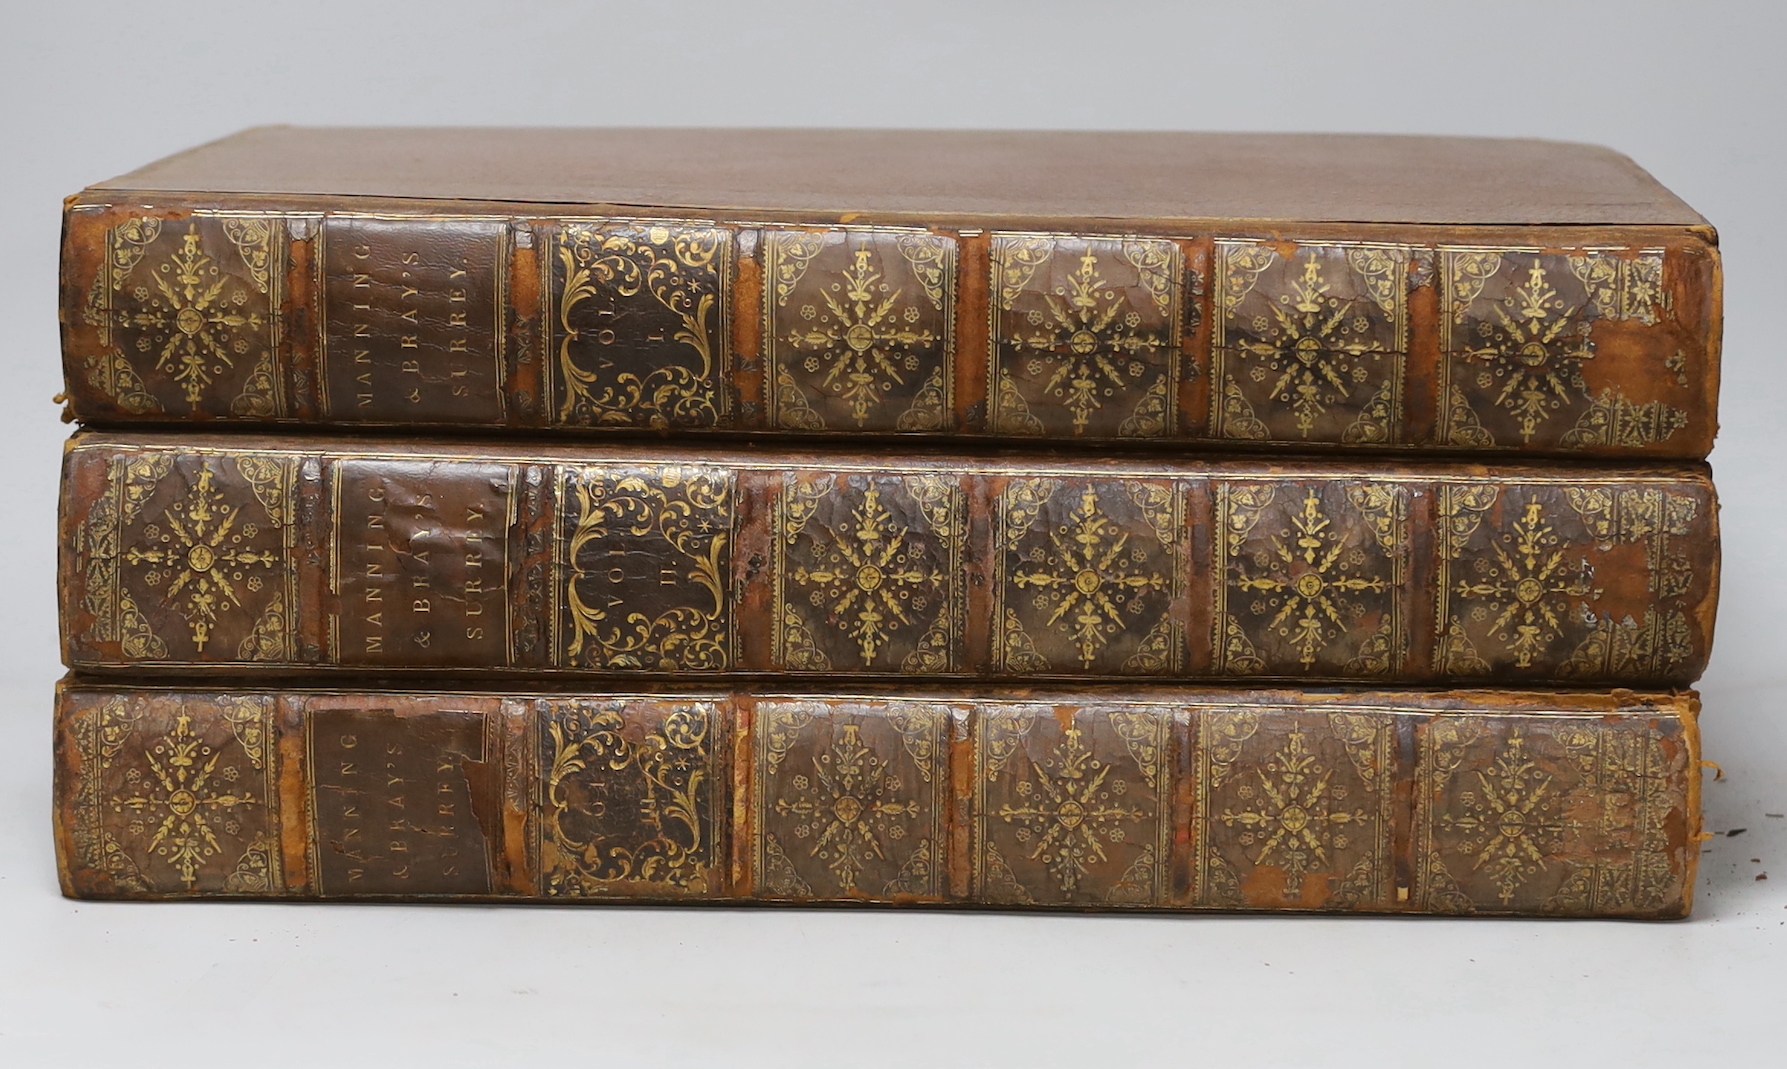 SURREY: Manning, Owen and William Bray. The History and Antiquities of the County of Surrey, 3 vols., 2 folding maps, 82 engraved plates including 13 Domesday facsimiles, 13 folding genealogies, near contemporary calf, L